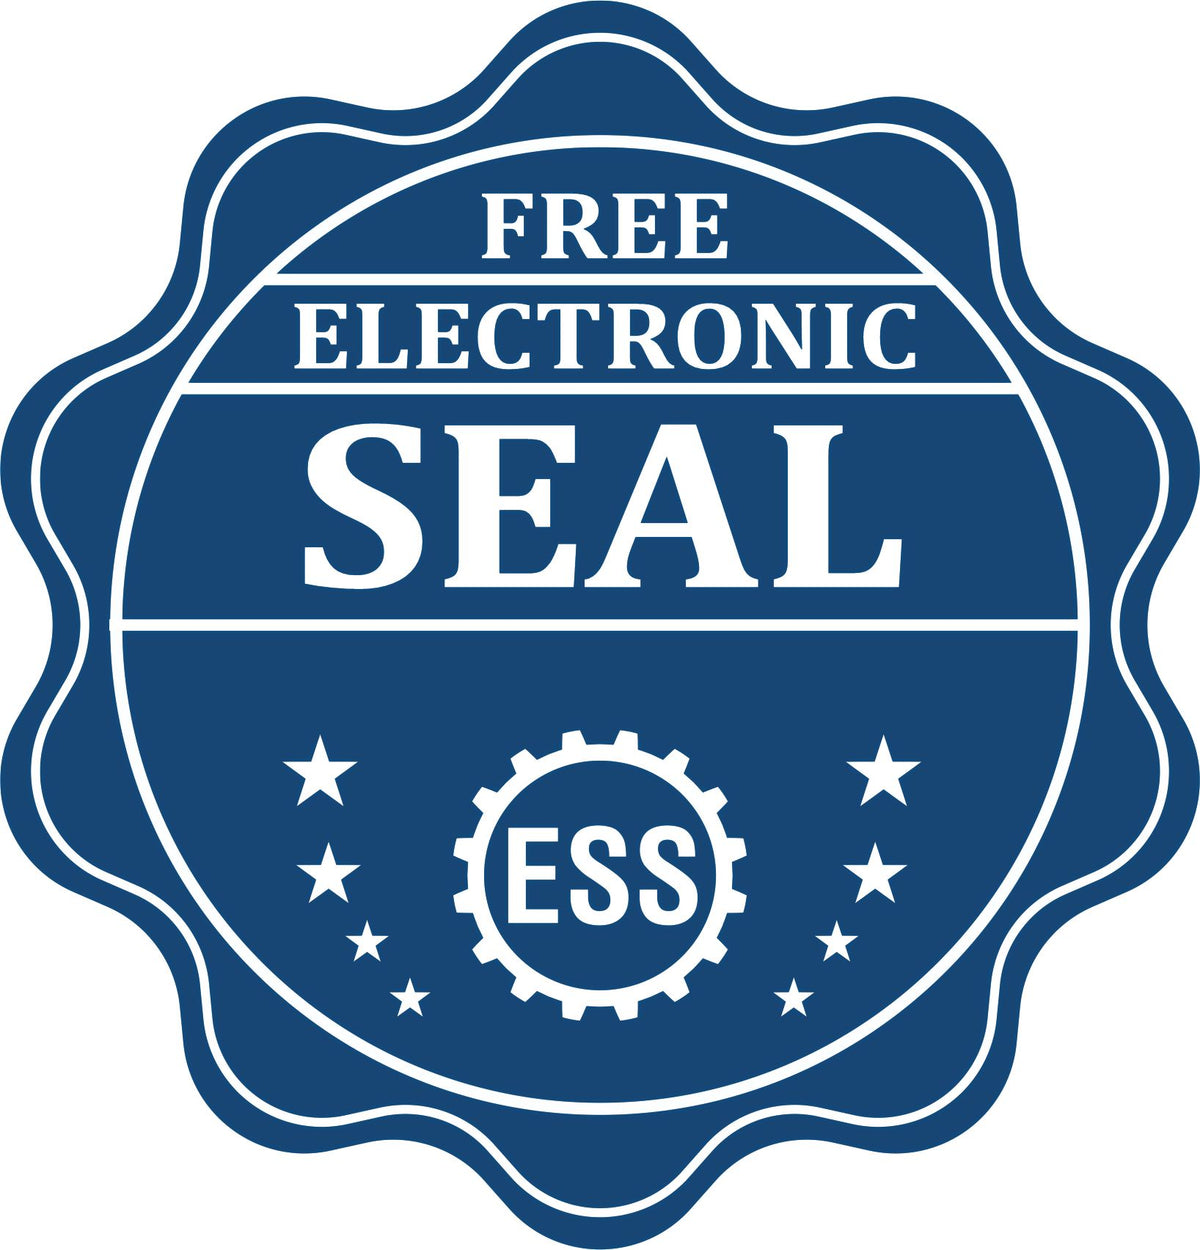 A badge showing a free electronic seal for the Wooden Handle Guam Rectangular Notary Public Stamp with stars and the ESS gear on the emblem.